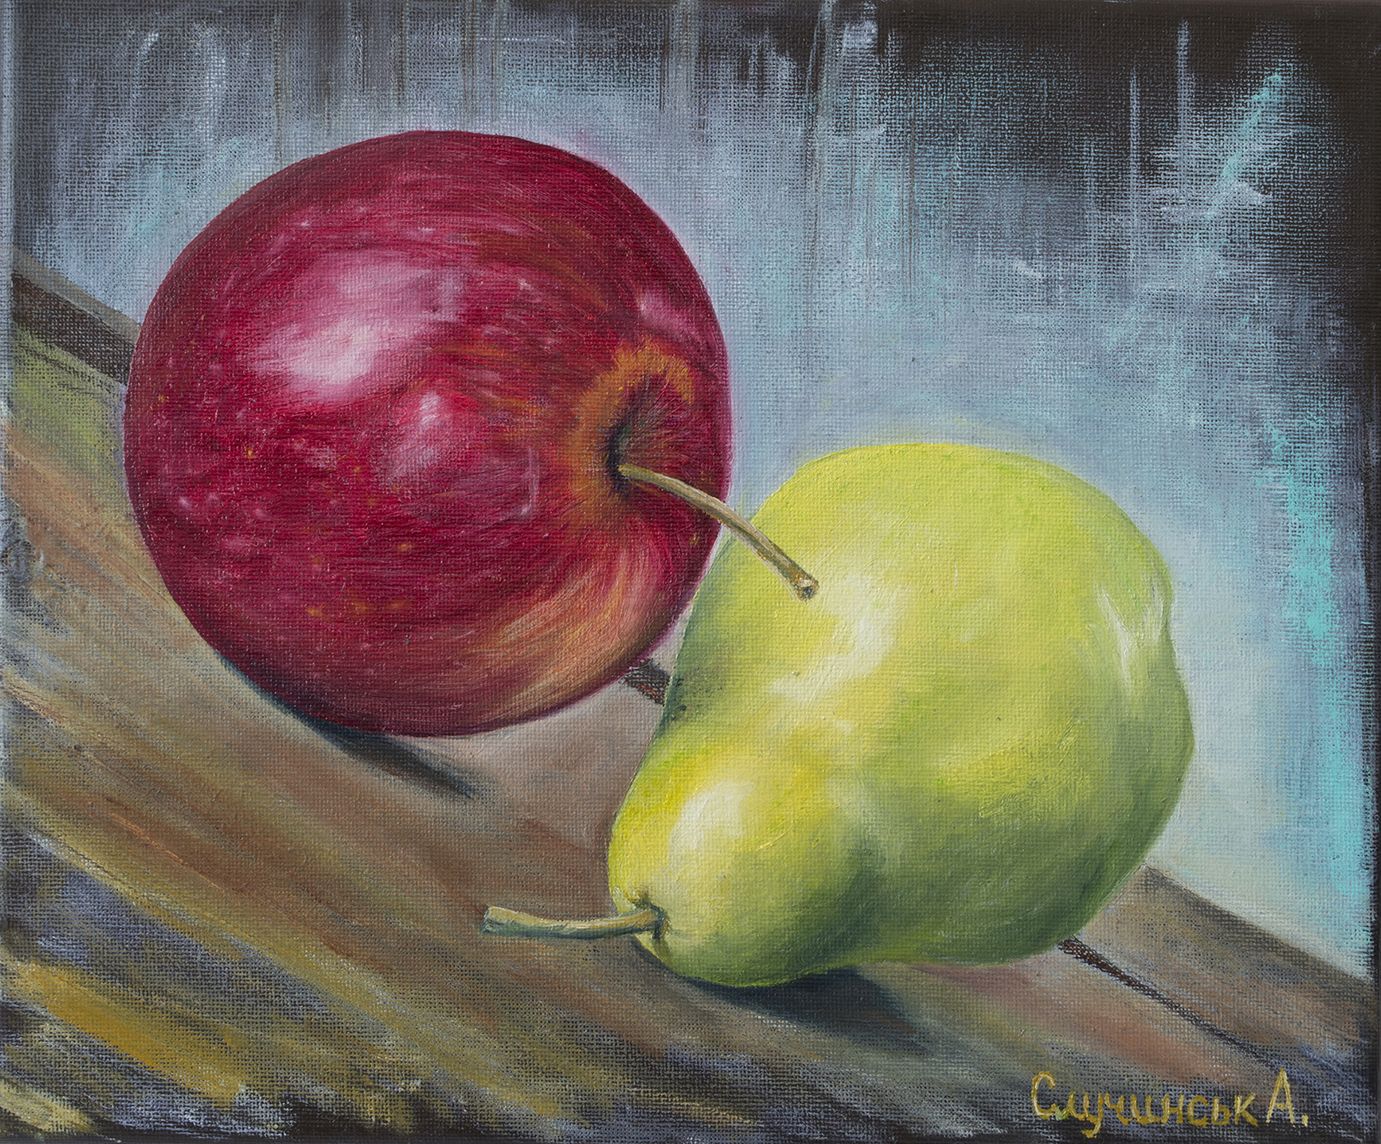 Apple and pear